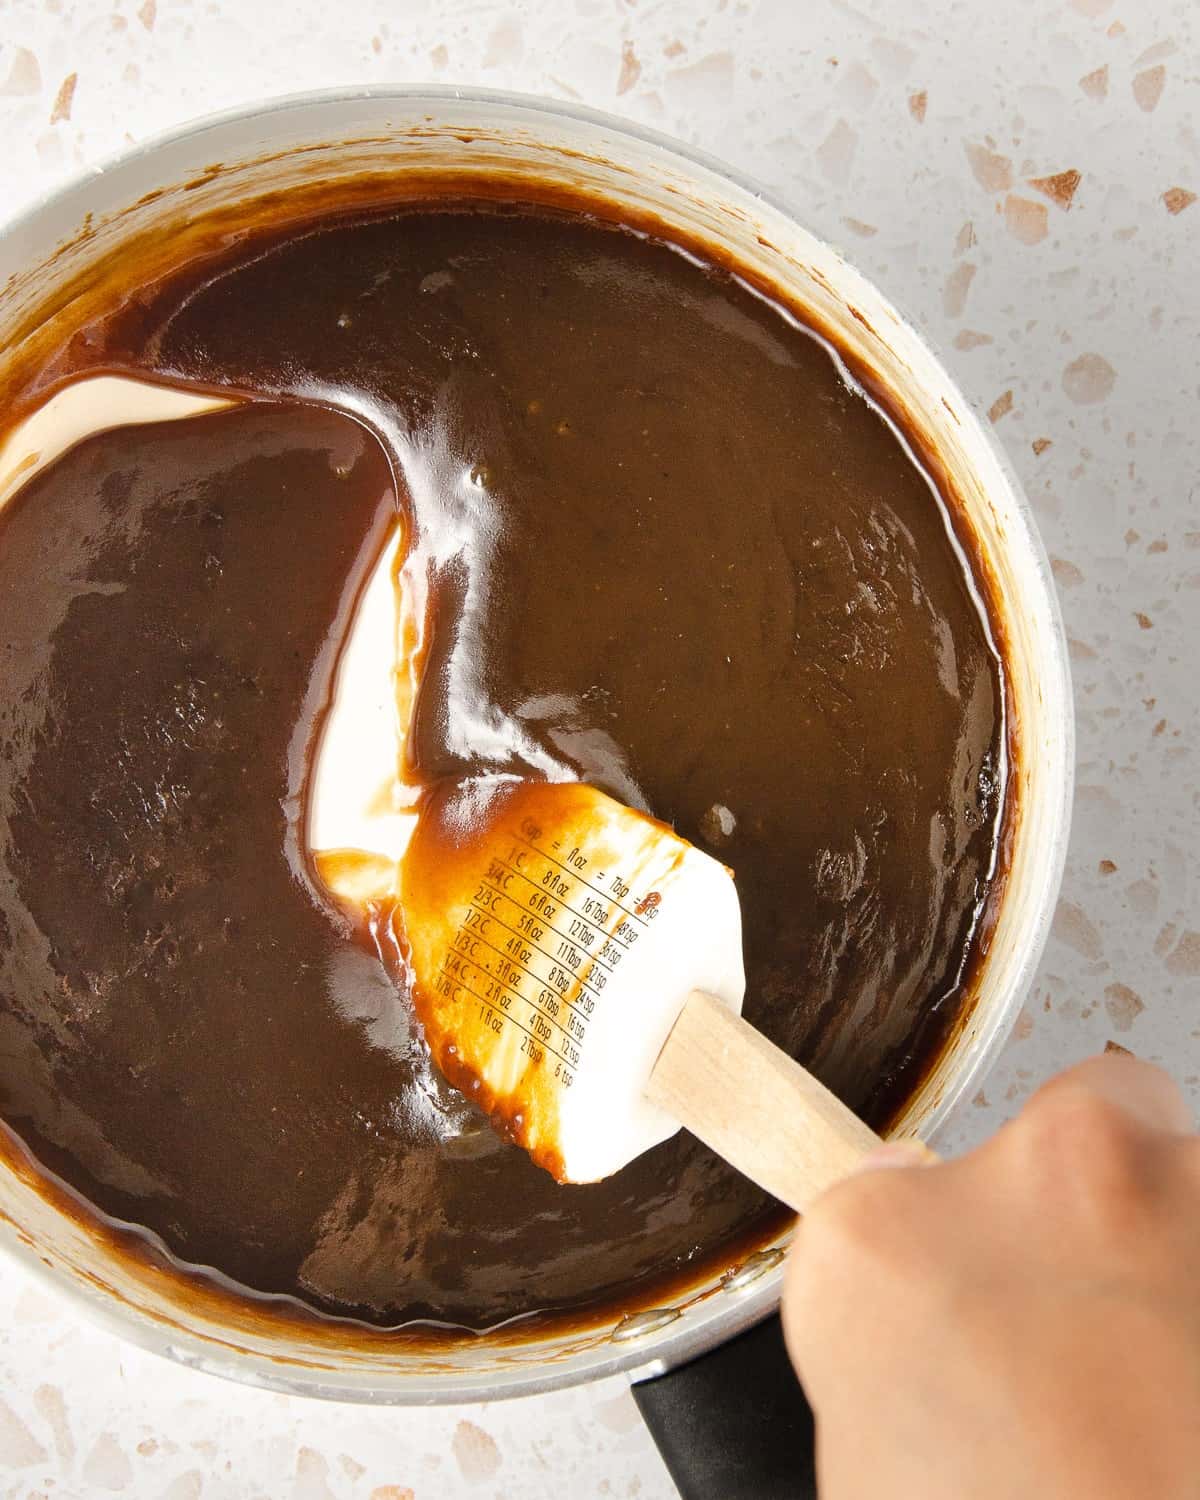 The final step of making vegan salted caramel - add vanilla extract after taking it off the heat and smooth it together.